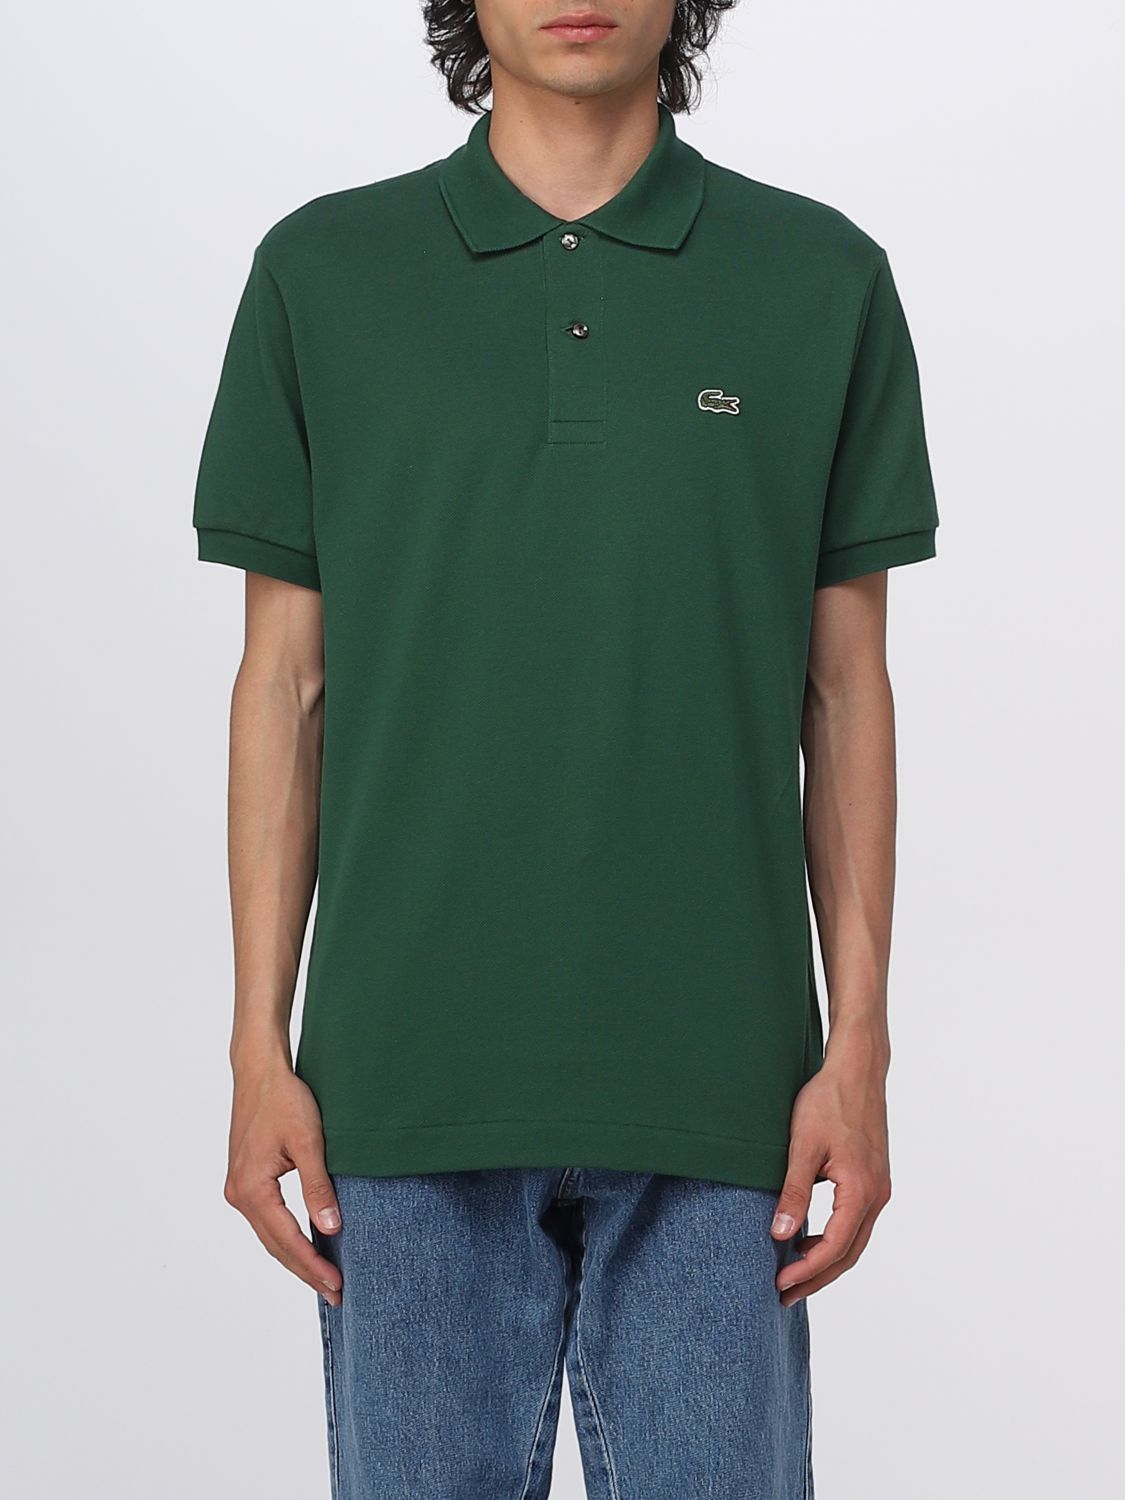 Lacoste polo shirt for man